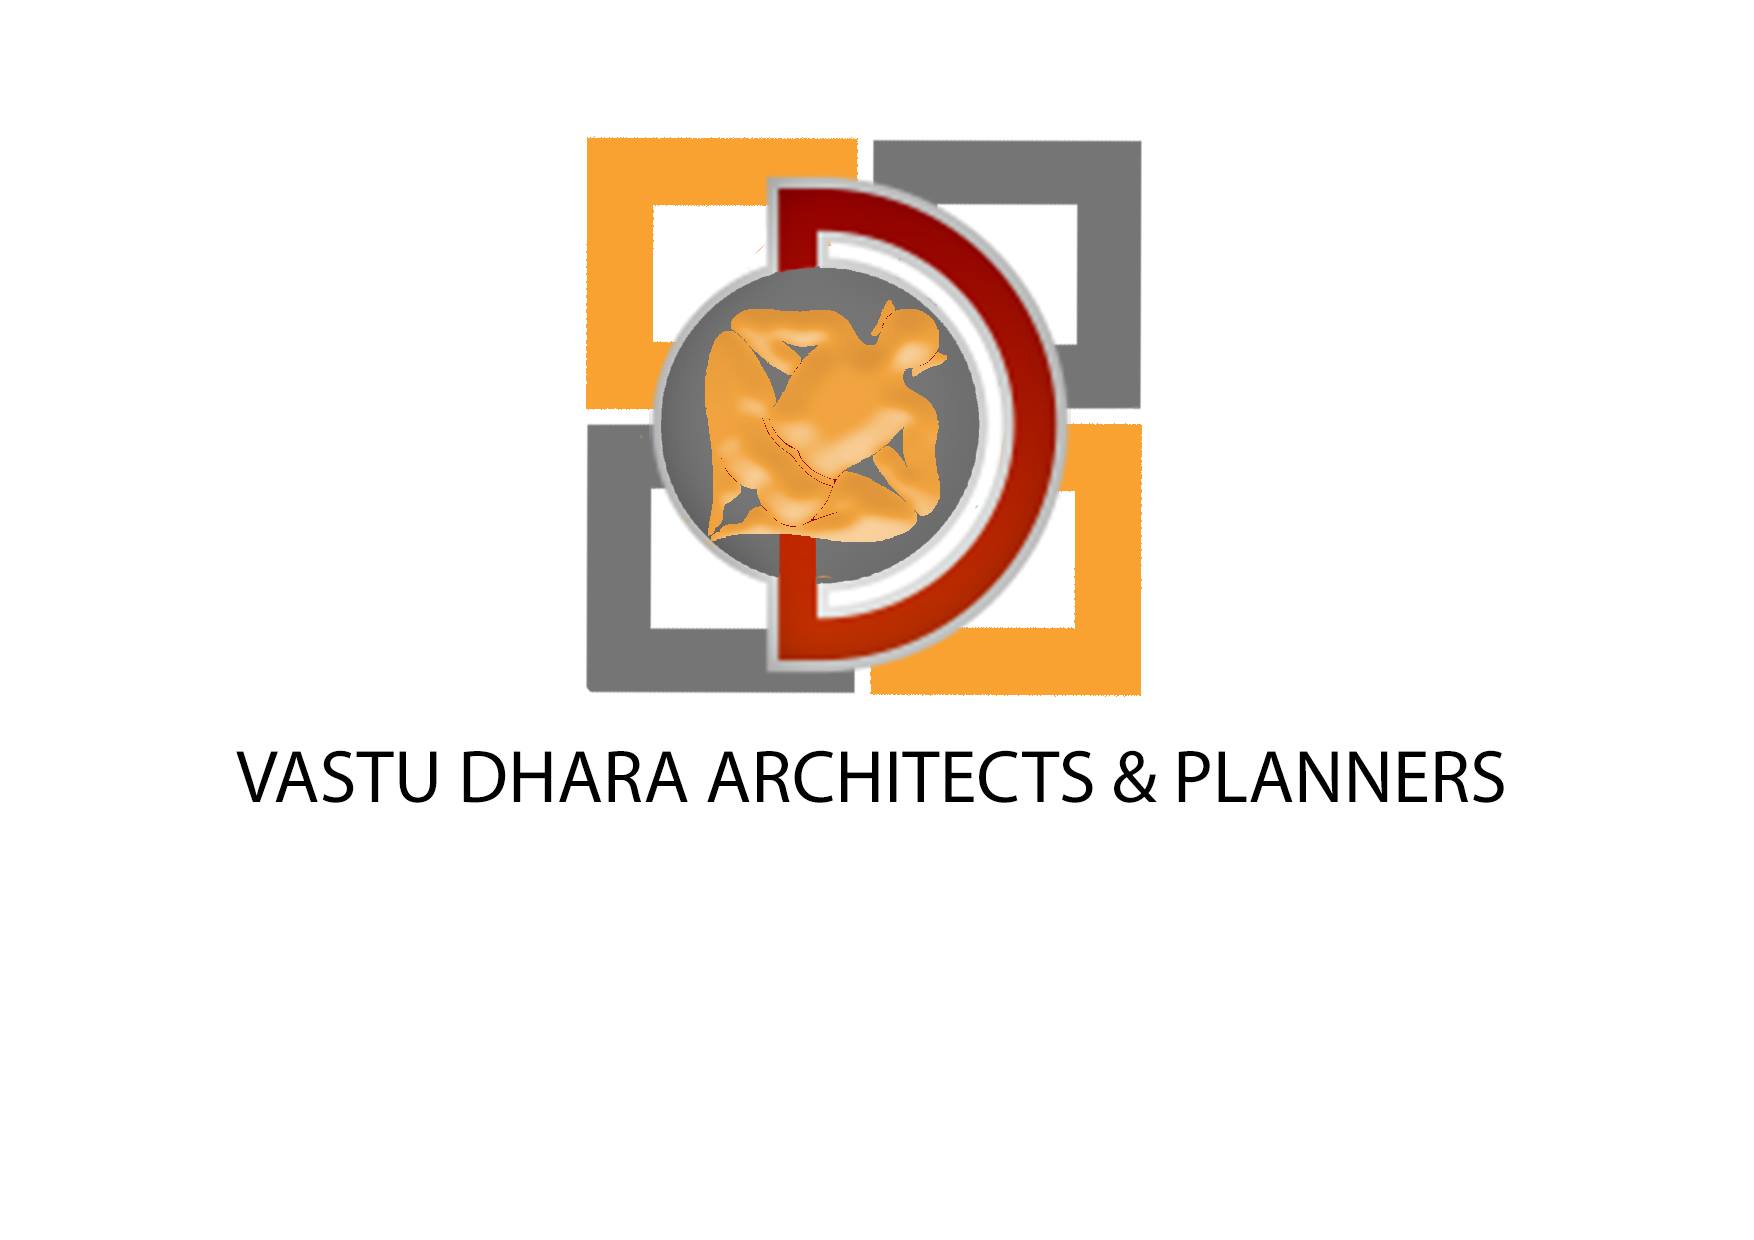 VASTU DHARA ARCHITECTS & PLANNERS|Accounting Services|Professional Services